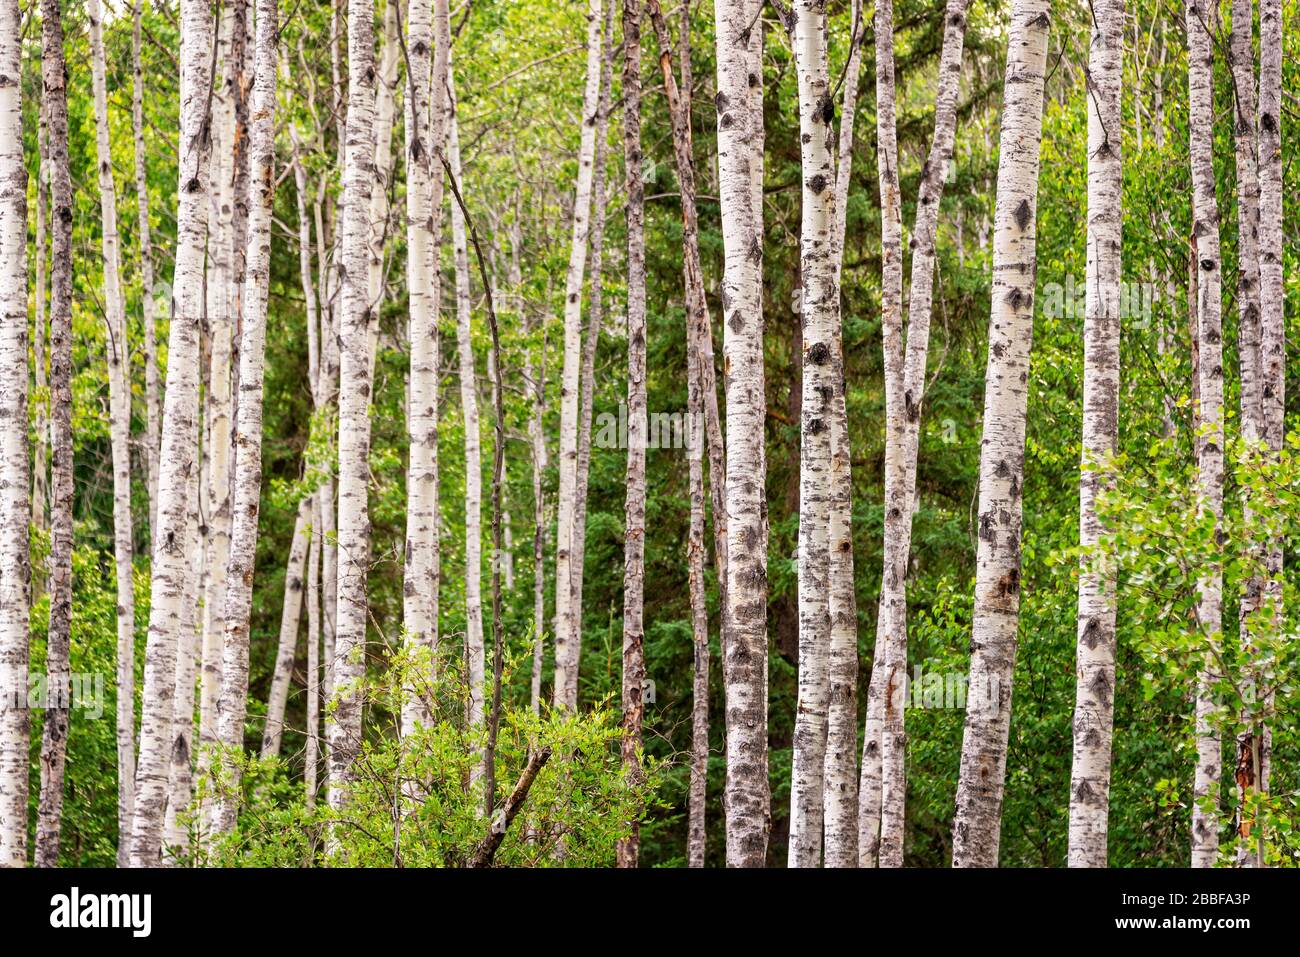 Birch trees forest in summer Birch tree trunks on green pine trees background Stock Photo